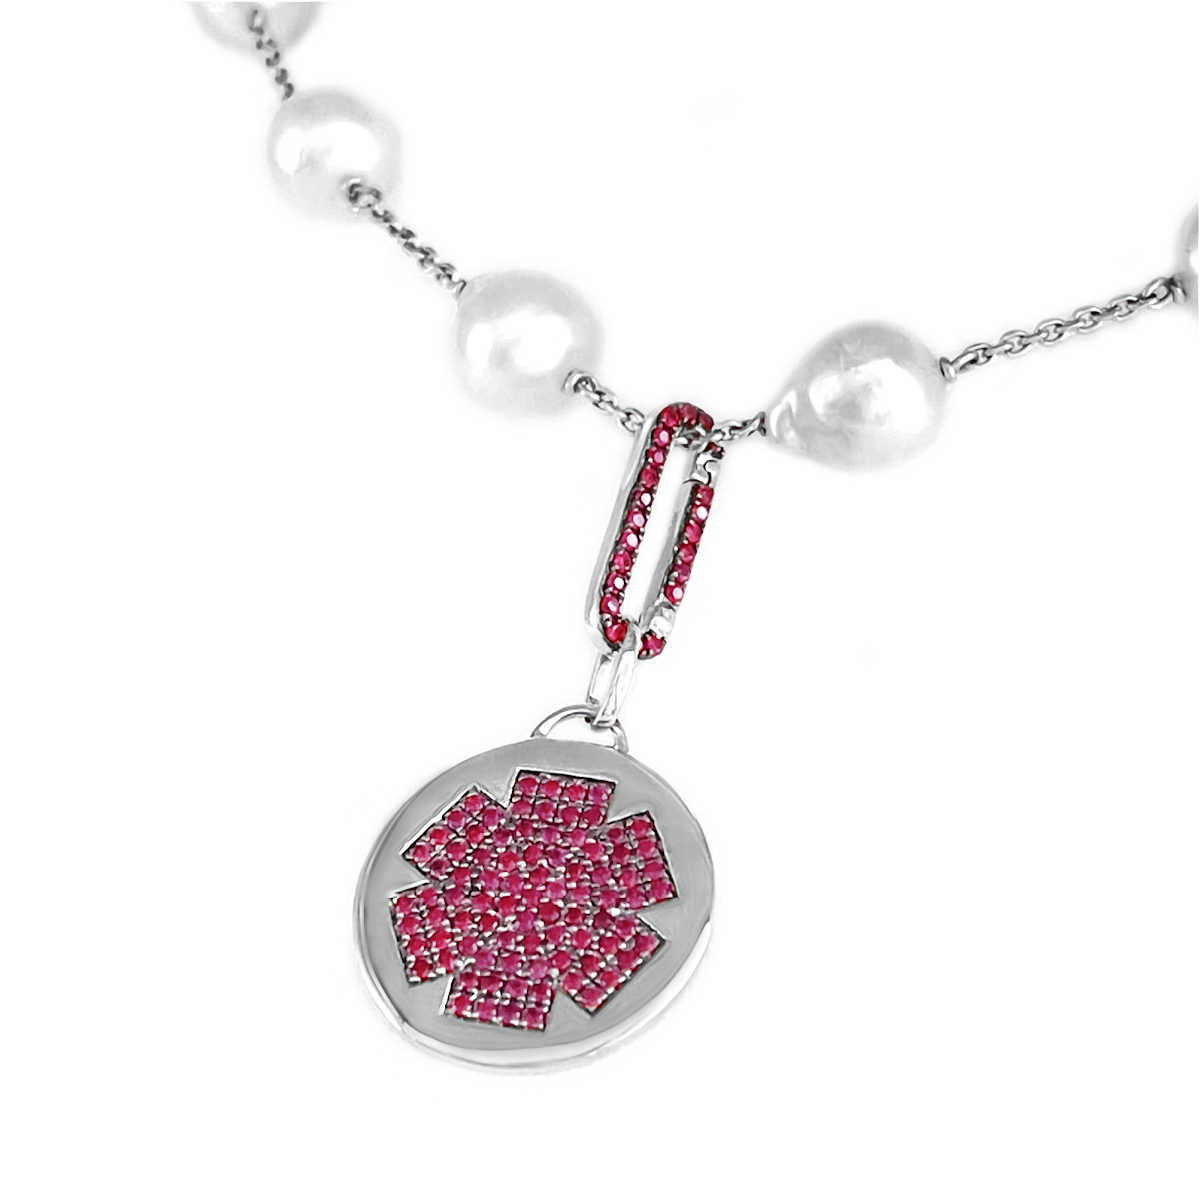 White Gold Medical Alert Charm for Bracelet or Necklace with Ruby